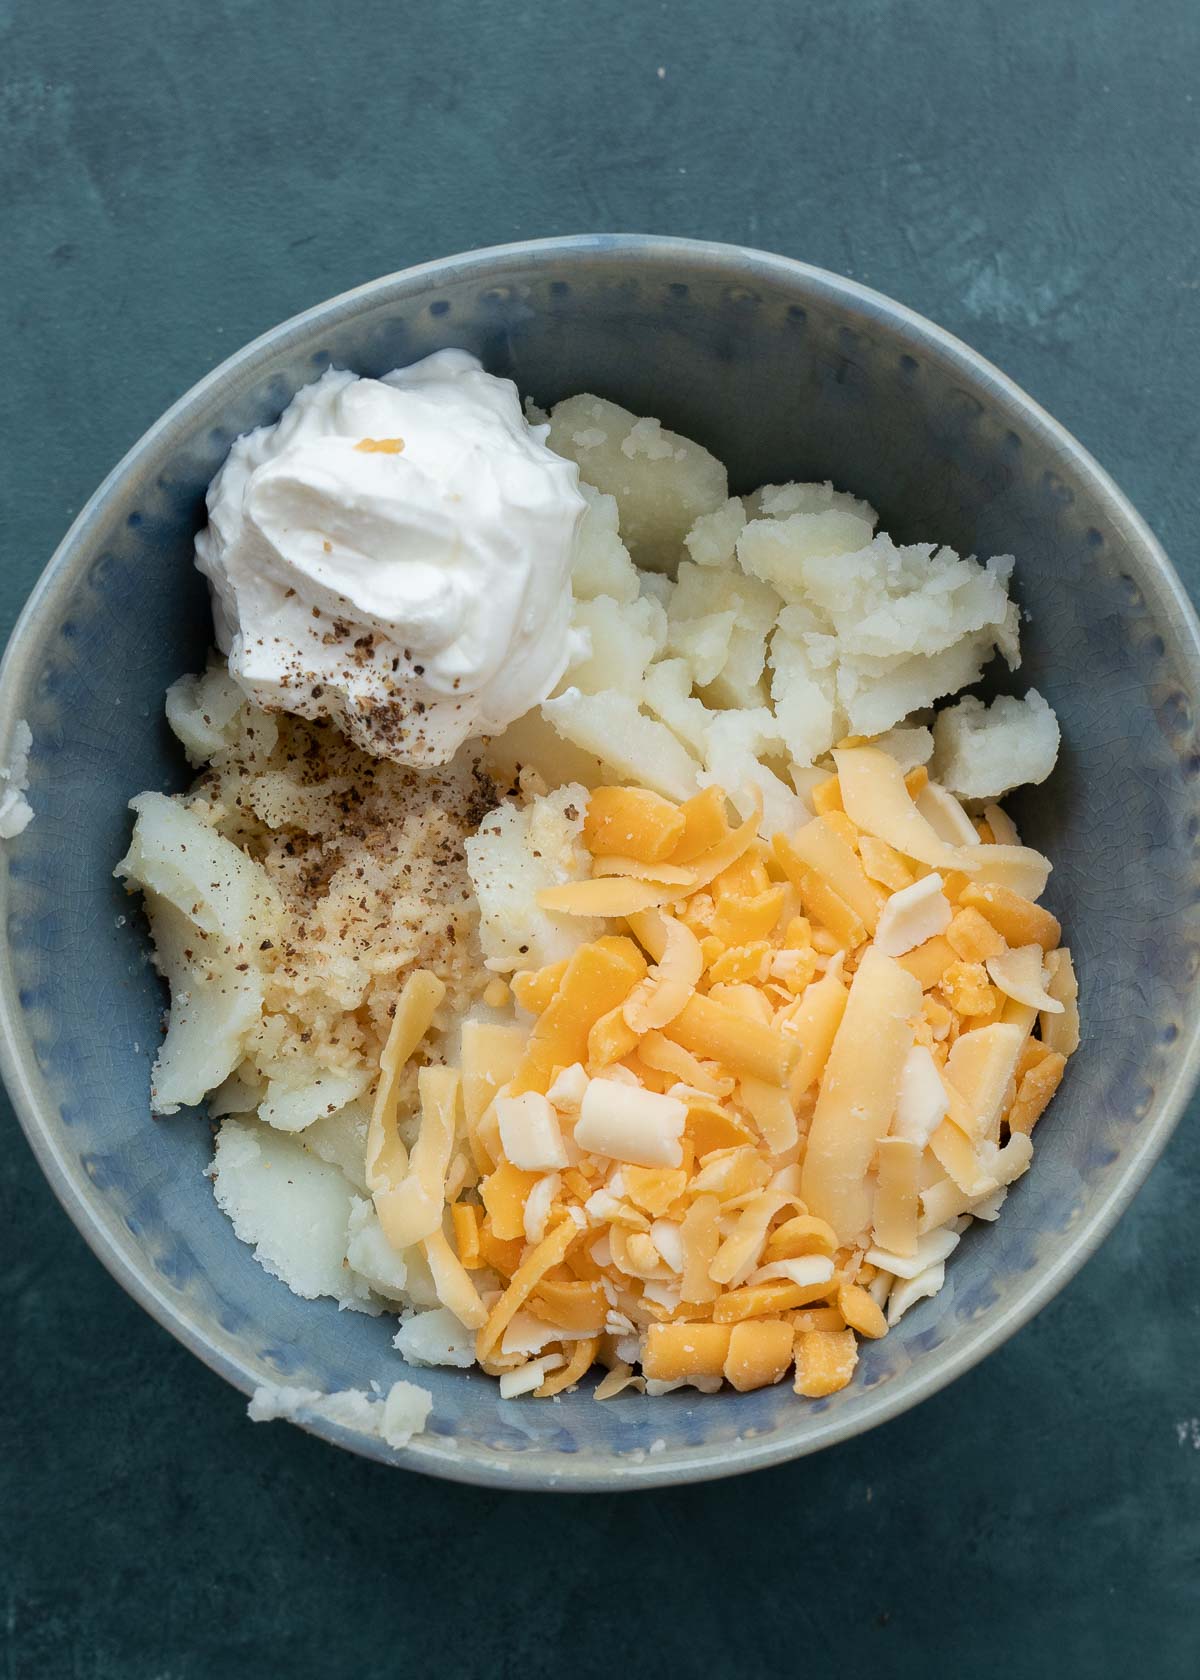 mix together sour cream, milk, scooped potato, melted butter, and 1/4 cup cheese